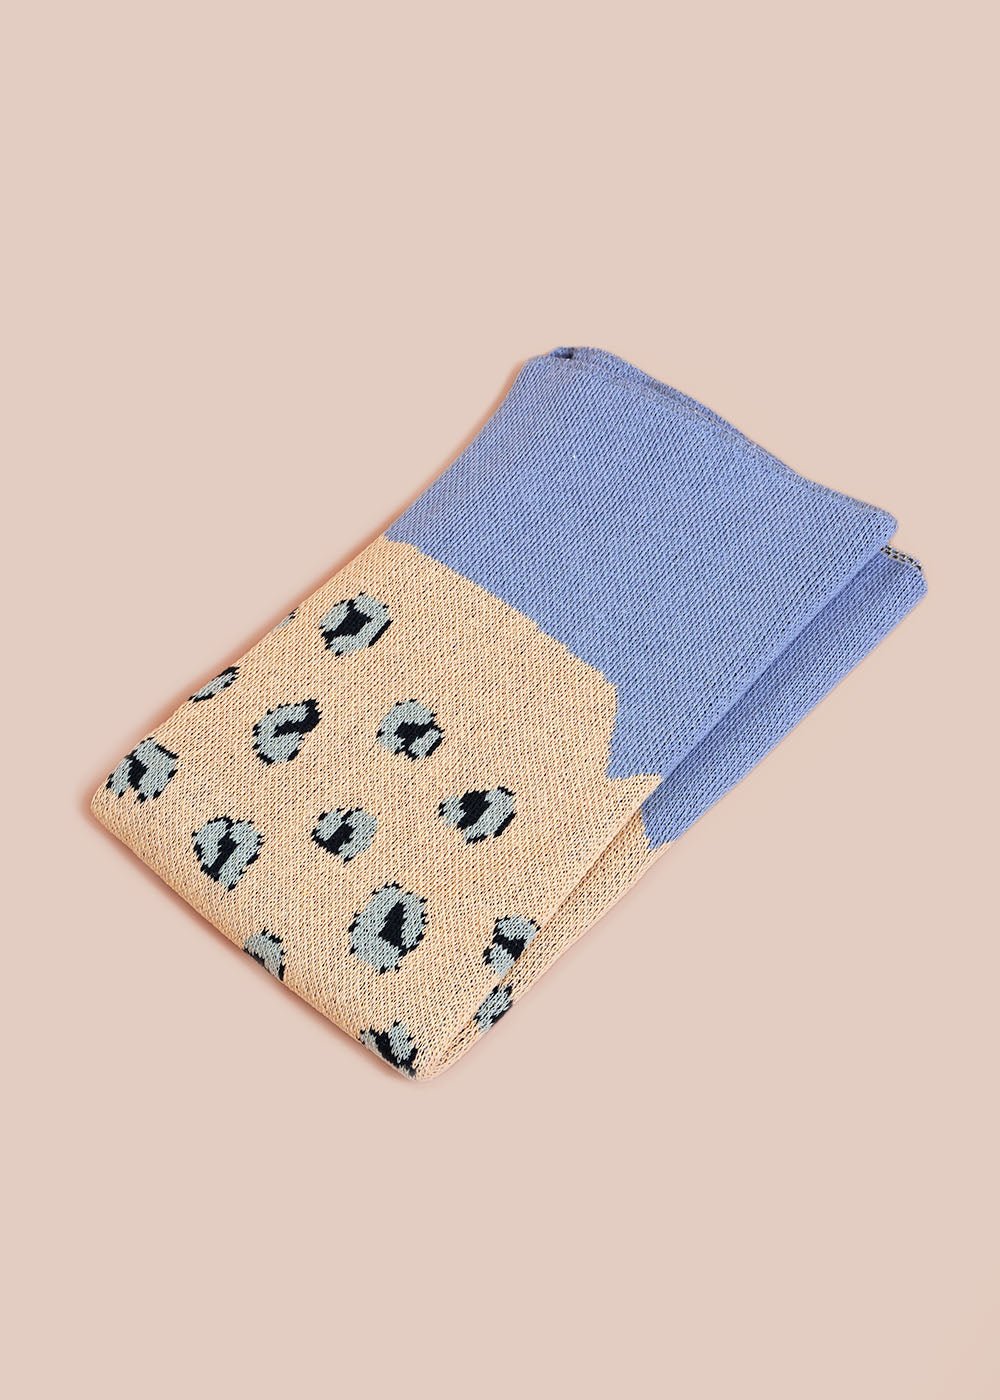 Cold Picnic Sky Leopard Baby Blanket - New Classics Studios Sustainable Ethical Fashion Canada